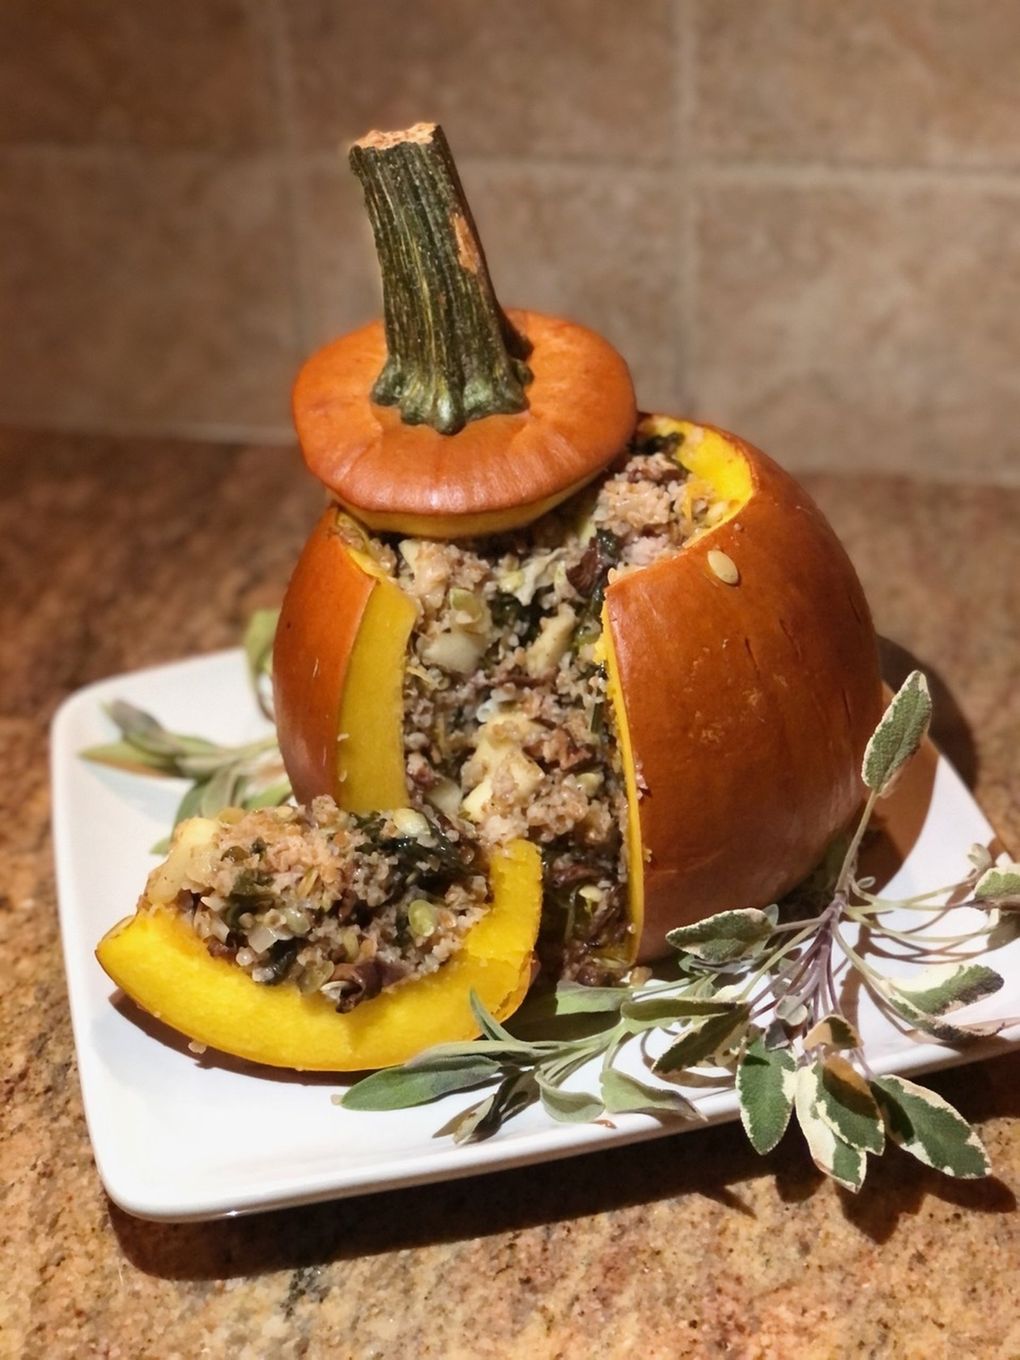 Joan and Keri Segna used the challenge as an opportunity to take a mother-daughter day. They stuffed a pumpkin with all matter of fall ingredients to make a savory delight.  (Courtesy of The Segnas)